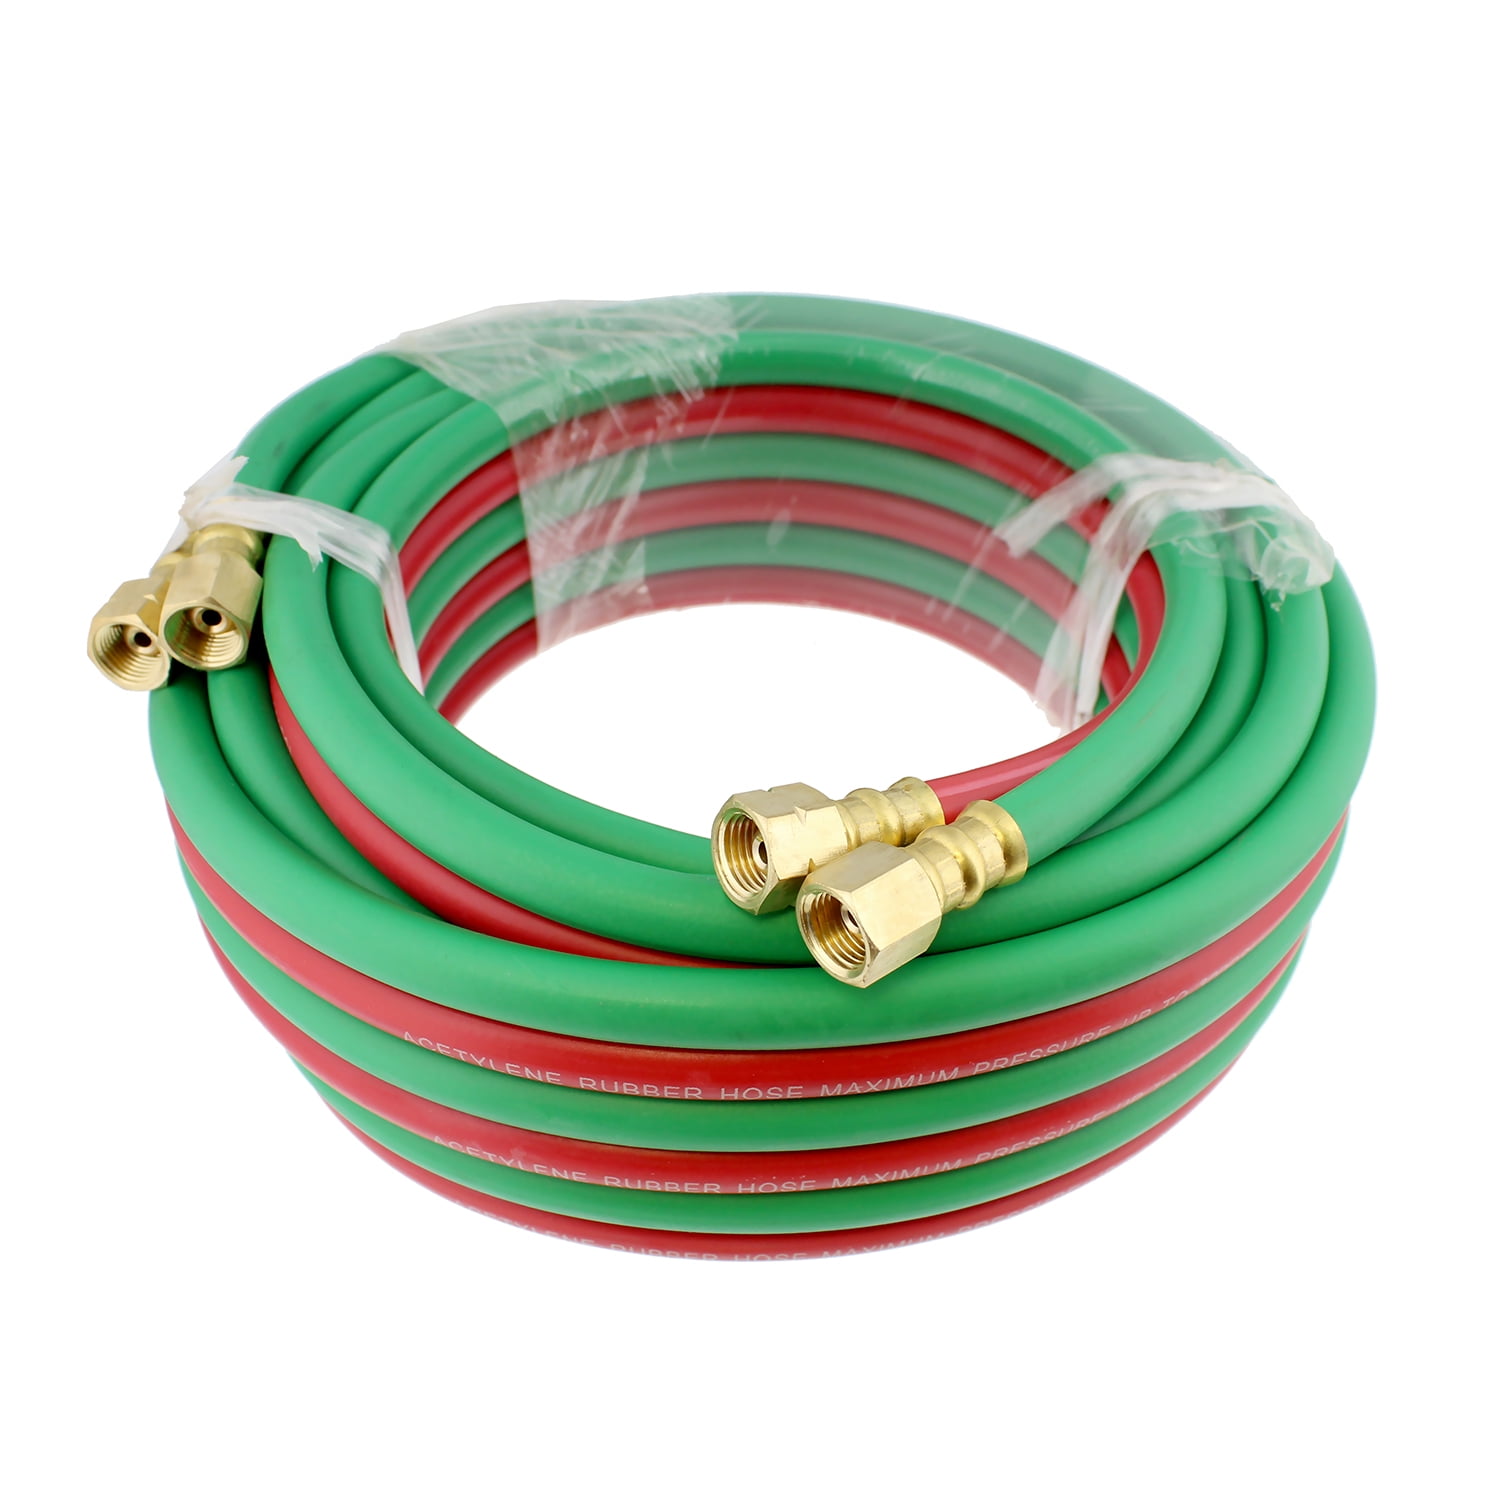 Pair 6mm Full BS Certs Fully Fitted 20mtr 1/4" Set of Oxygen Acetylene Hose 